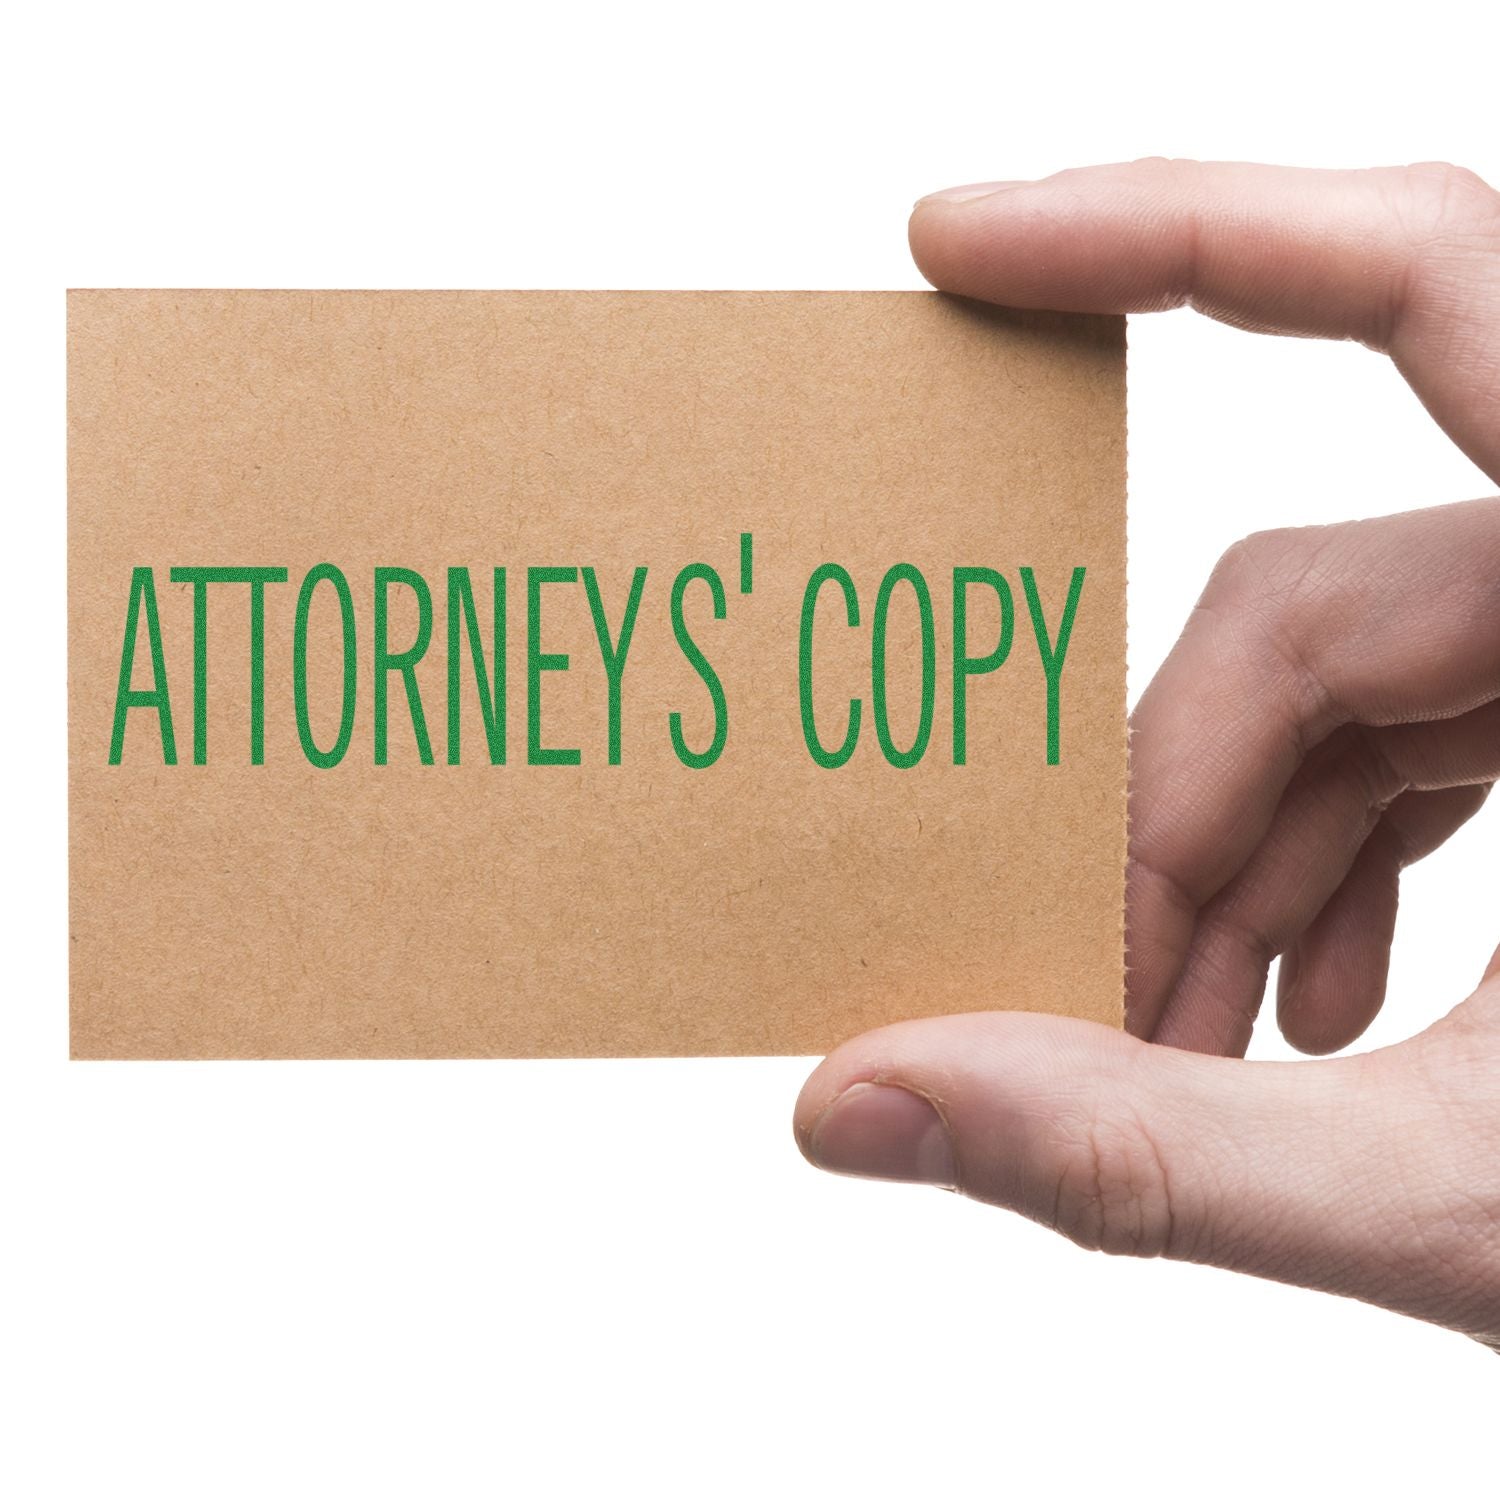 Attorneys' Copy Rubber Stamp In Use